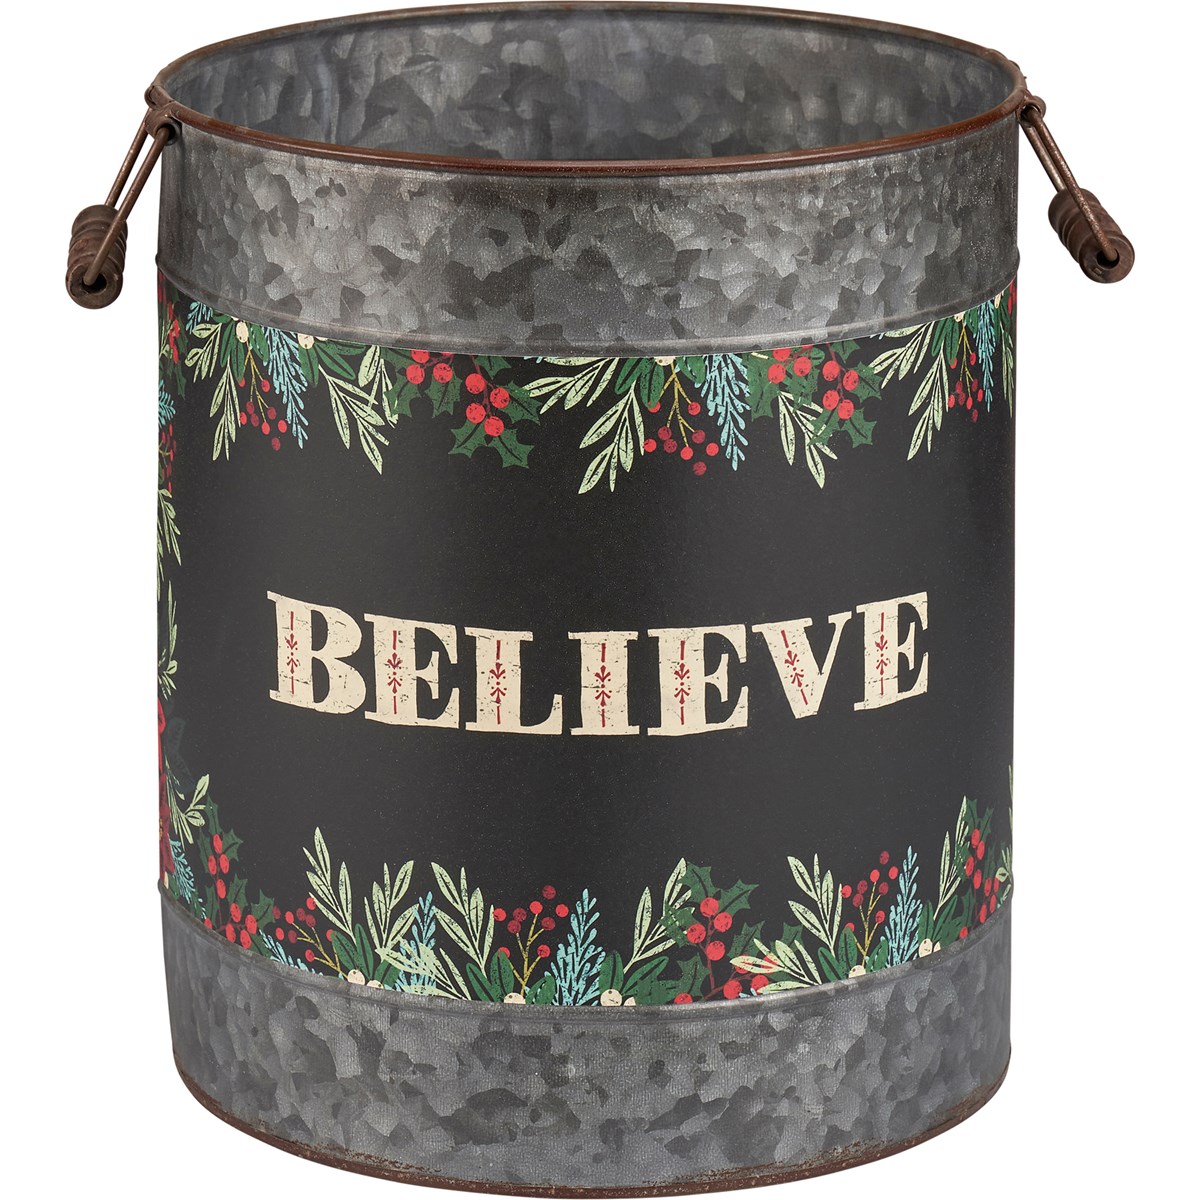 Merry And Bright Bucket Set - Metal, Paper, Wood